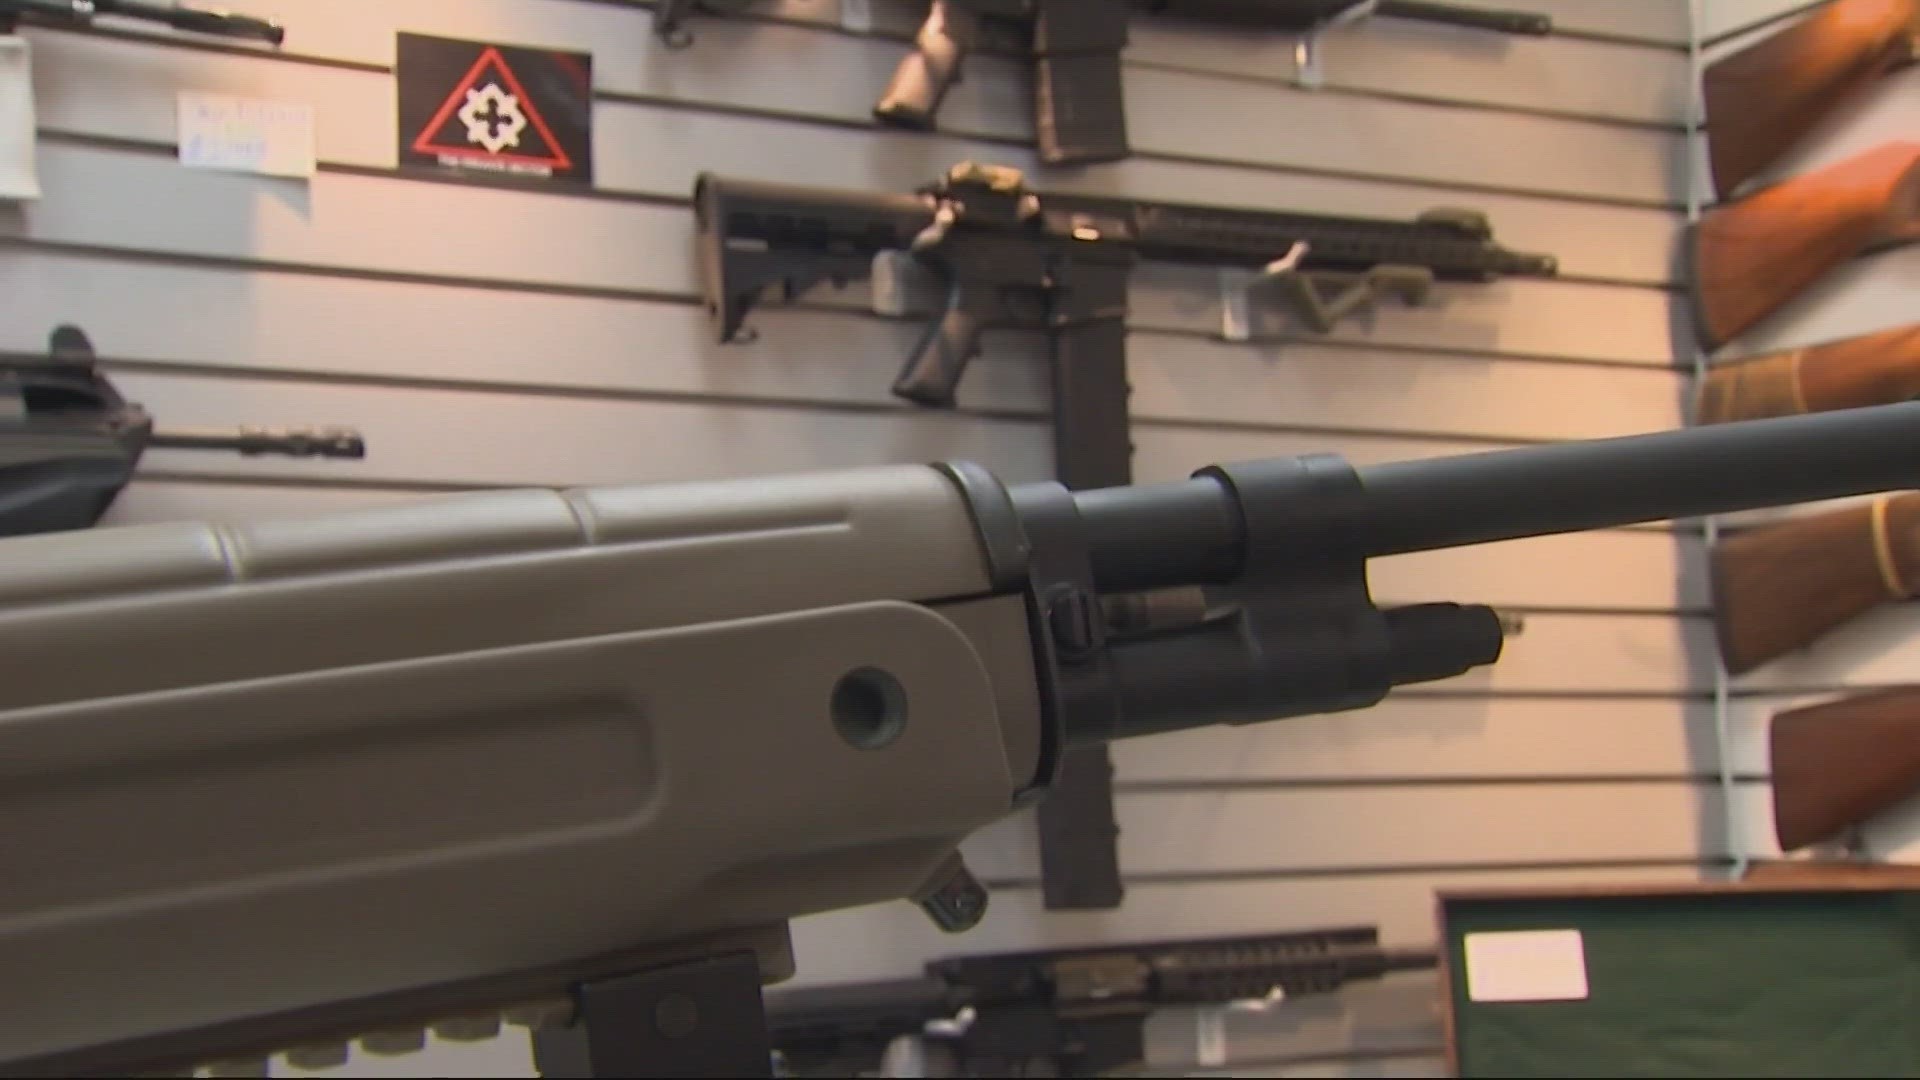 Washington's governor signed a bill Tuesday banning the sale of semi-automatic rifles. Opponents sued the state in federal court within hours.